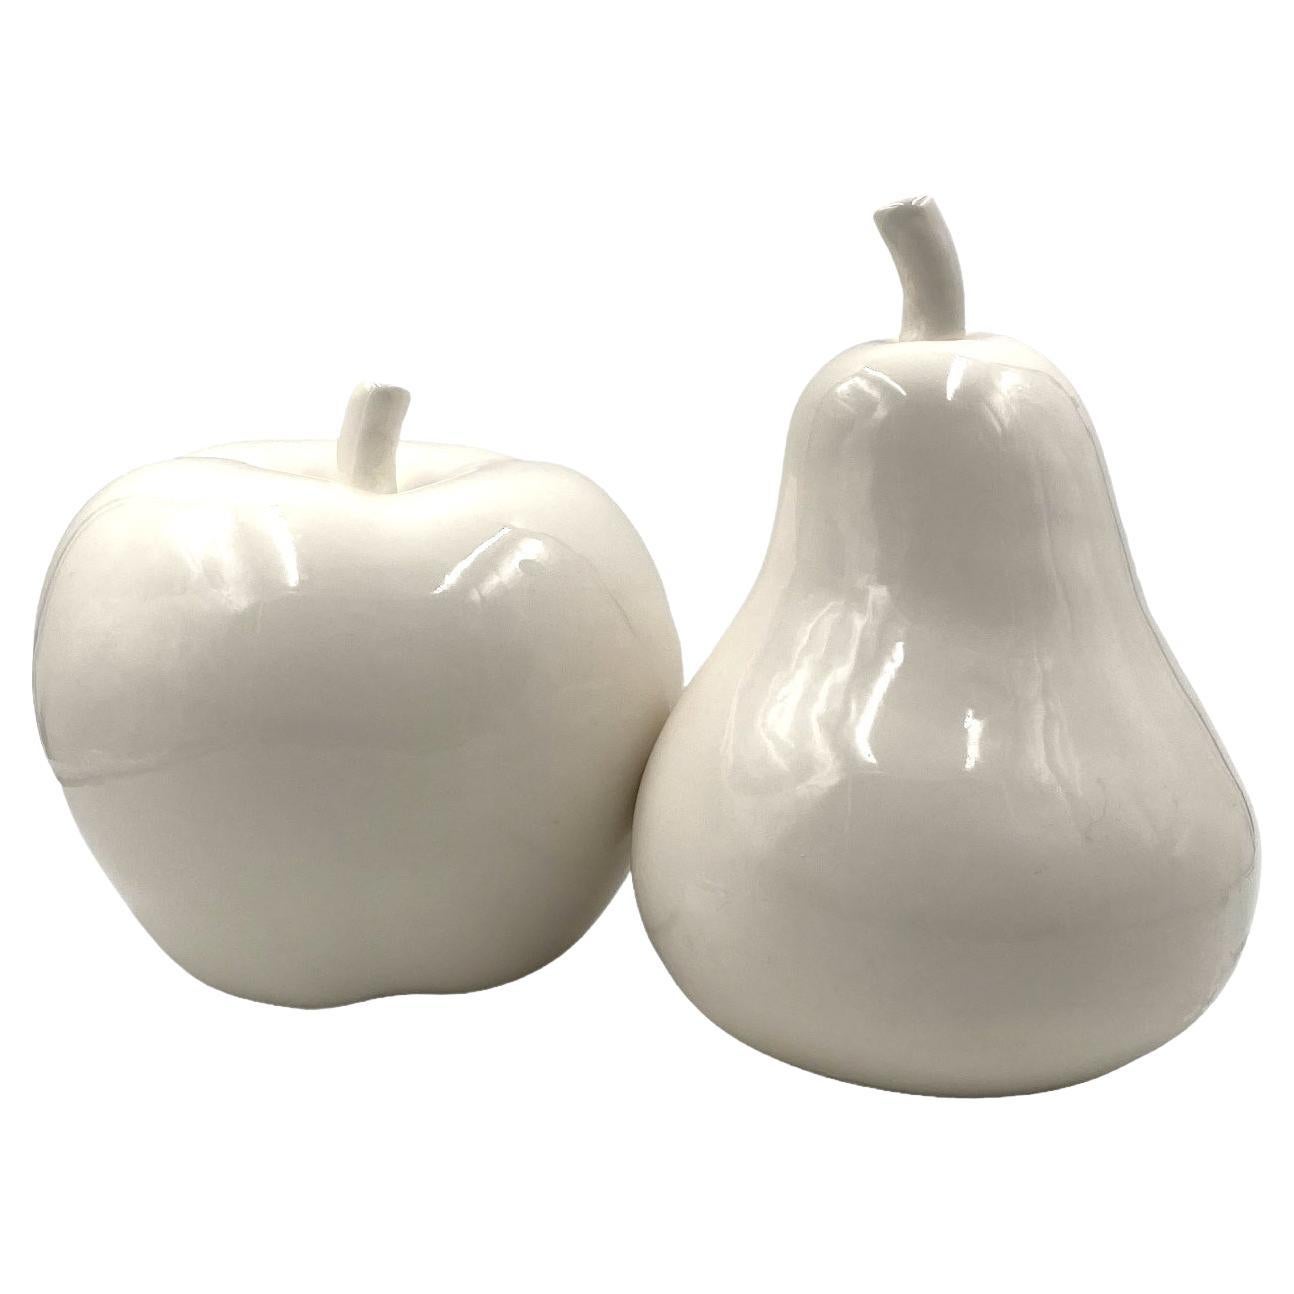 White ceramic Apple and Pear sculptures, Italy ca. 1980